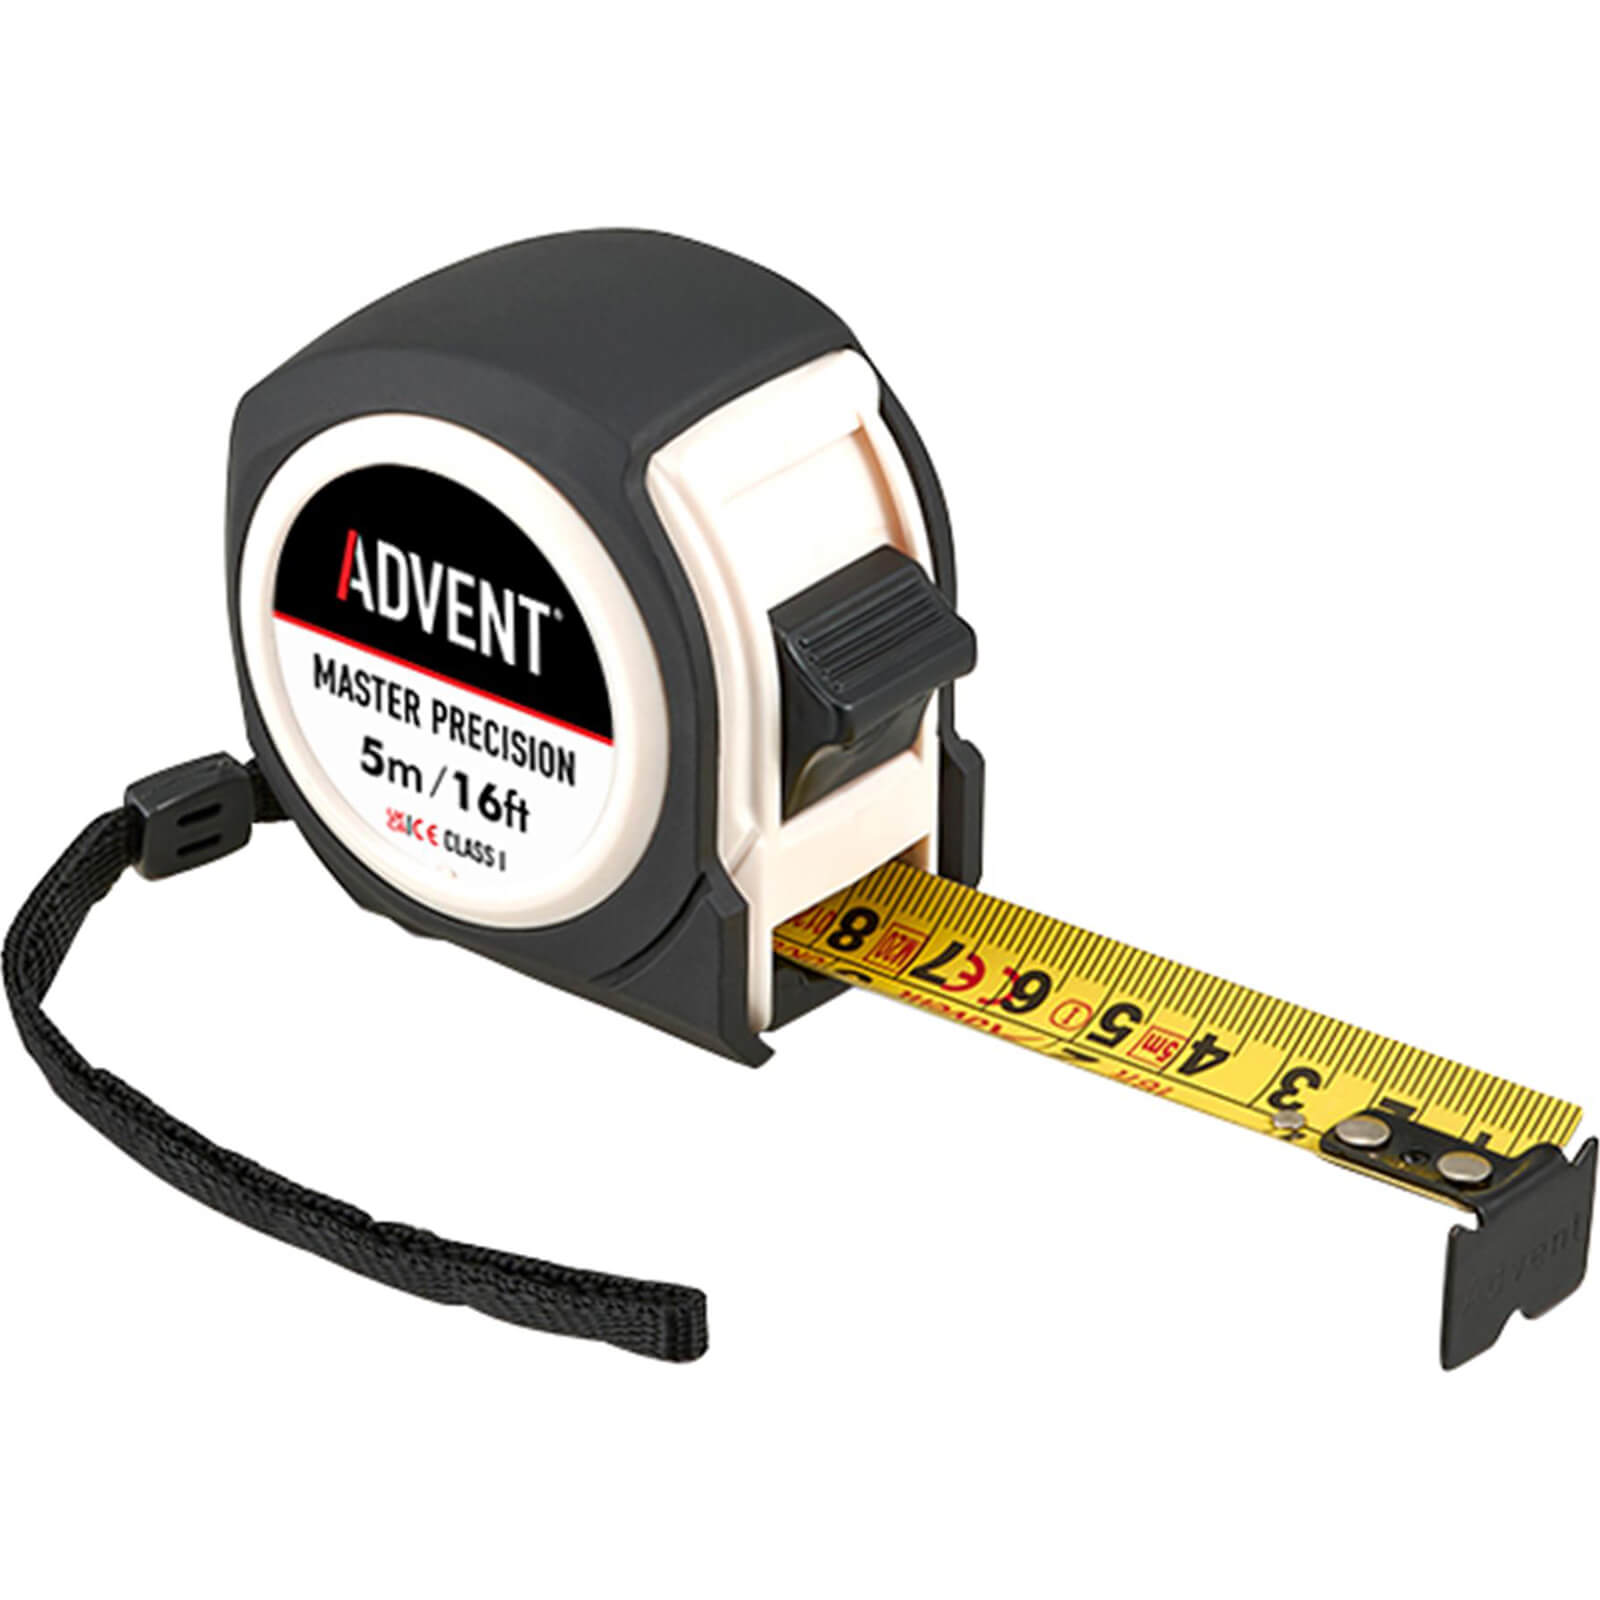 Image of Advent Master Precision Class 1 Tape Measure Imperial & Metric 16ft / 5m 25mm